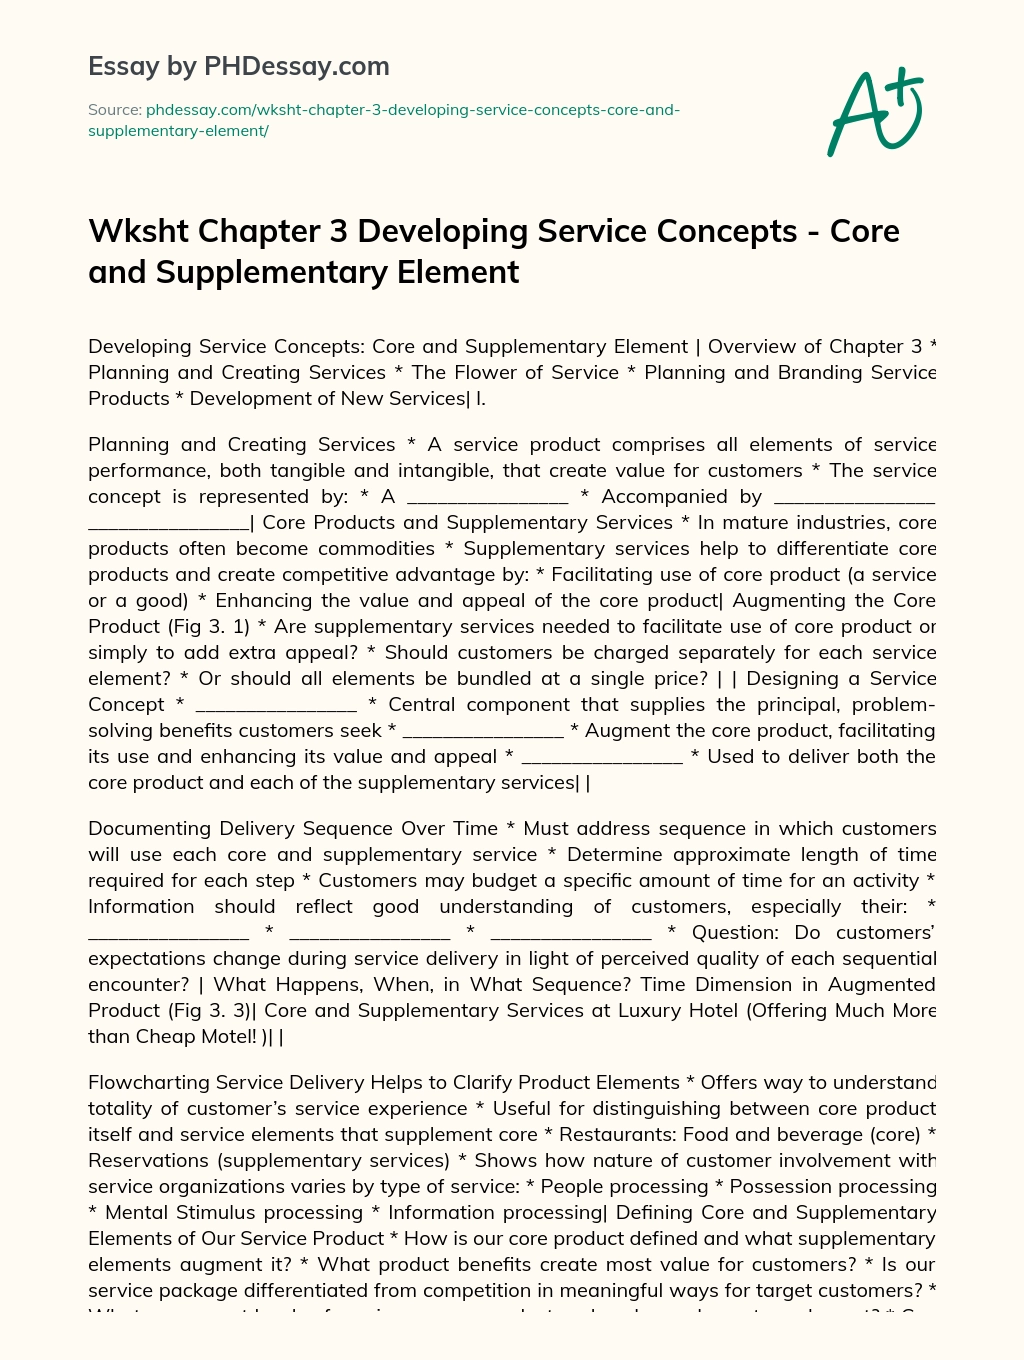 WKSHT Chapter 3 Developing Service Concepts – Core and Supplementary Element essay